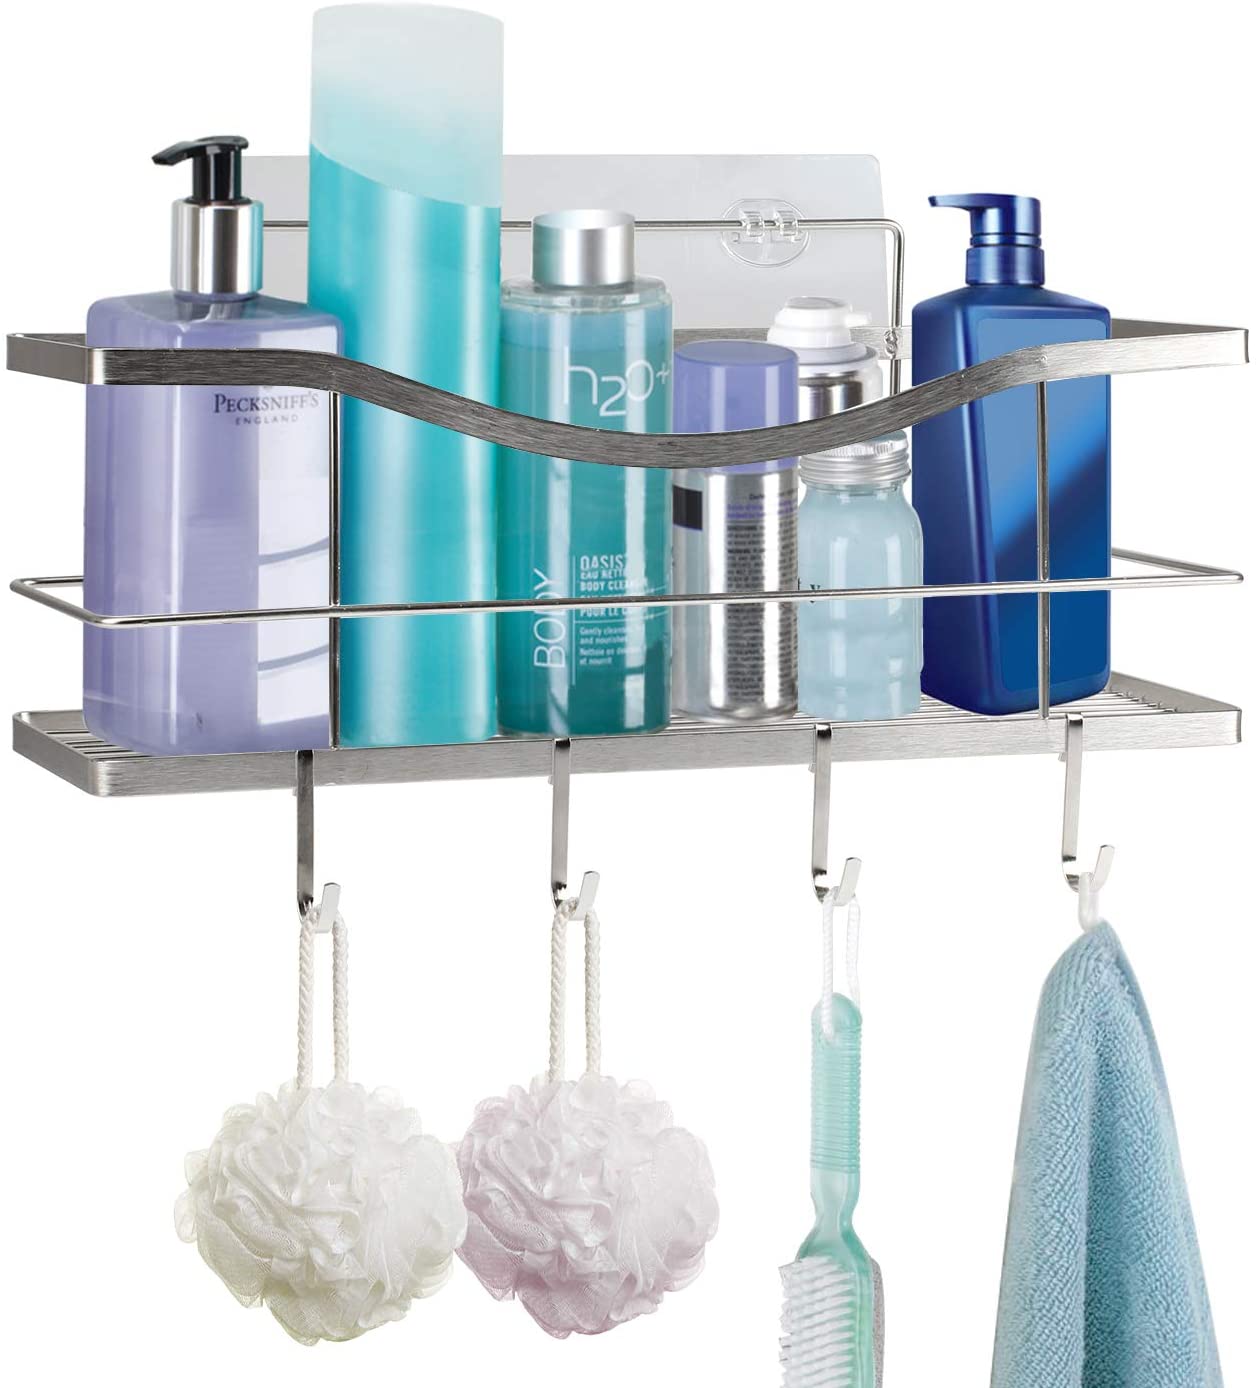 Carwiner Shower Shelf Deep Caddy 5-Pack basket with Soap Dish Holder,  Stainless Steel Bathroom Caddy Organizer Rack Adhesive Shampoo Holder Wall